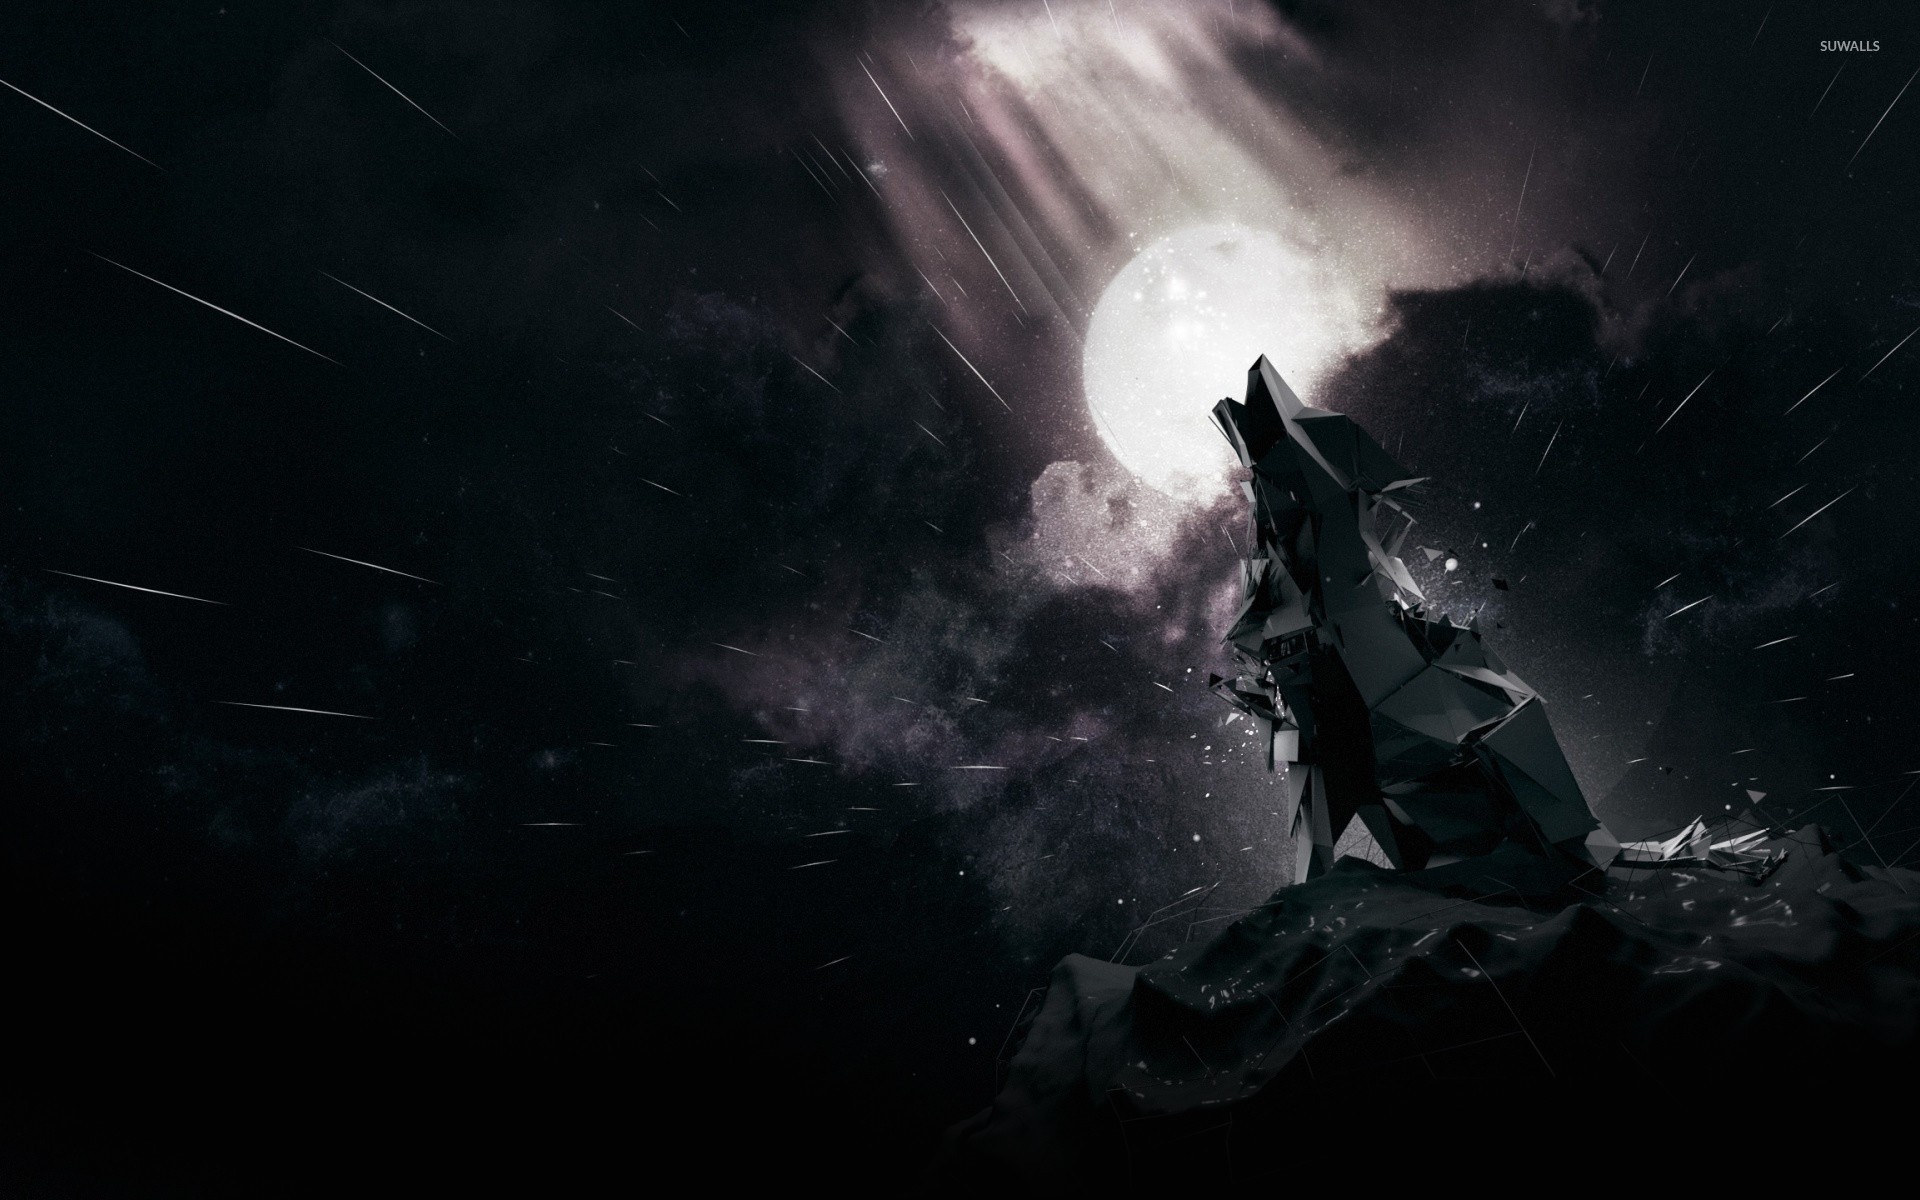 Wallpaper ID 579249  howling wolf backgrounds Download 3840x2400 Howling  4K dog crying free download